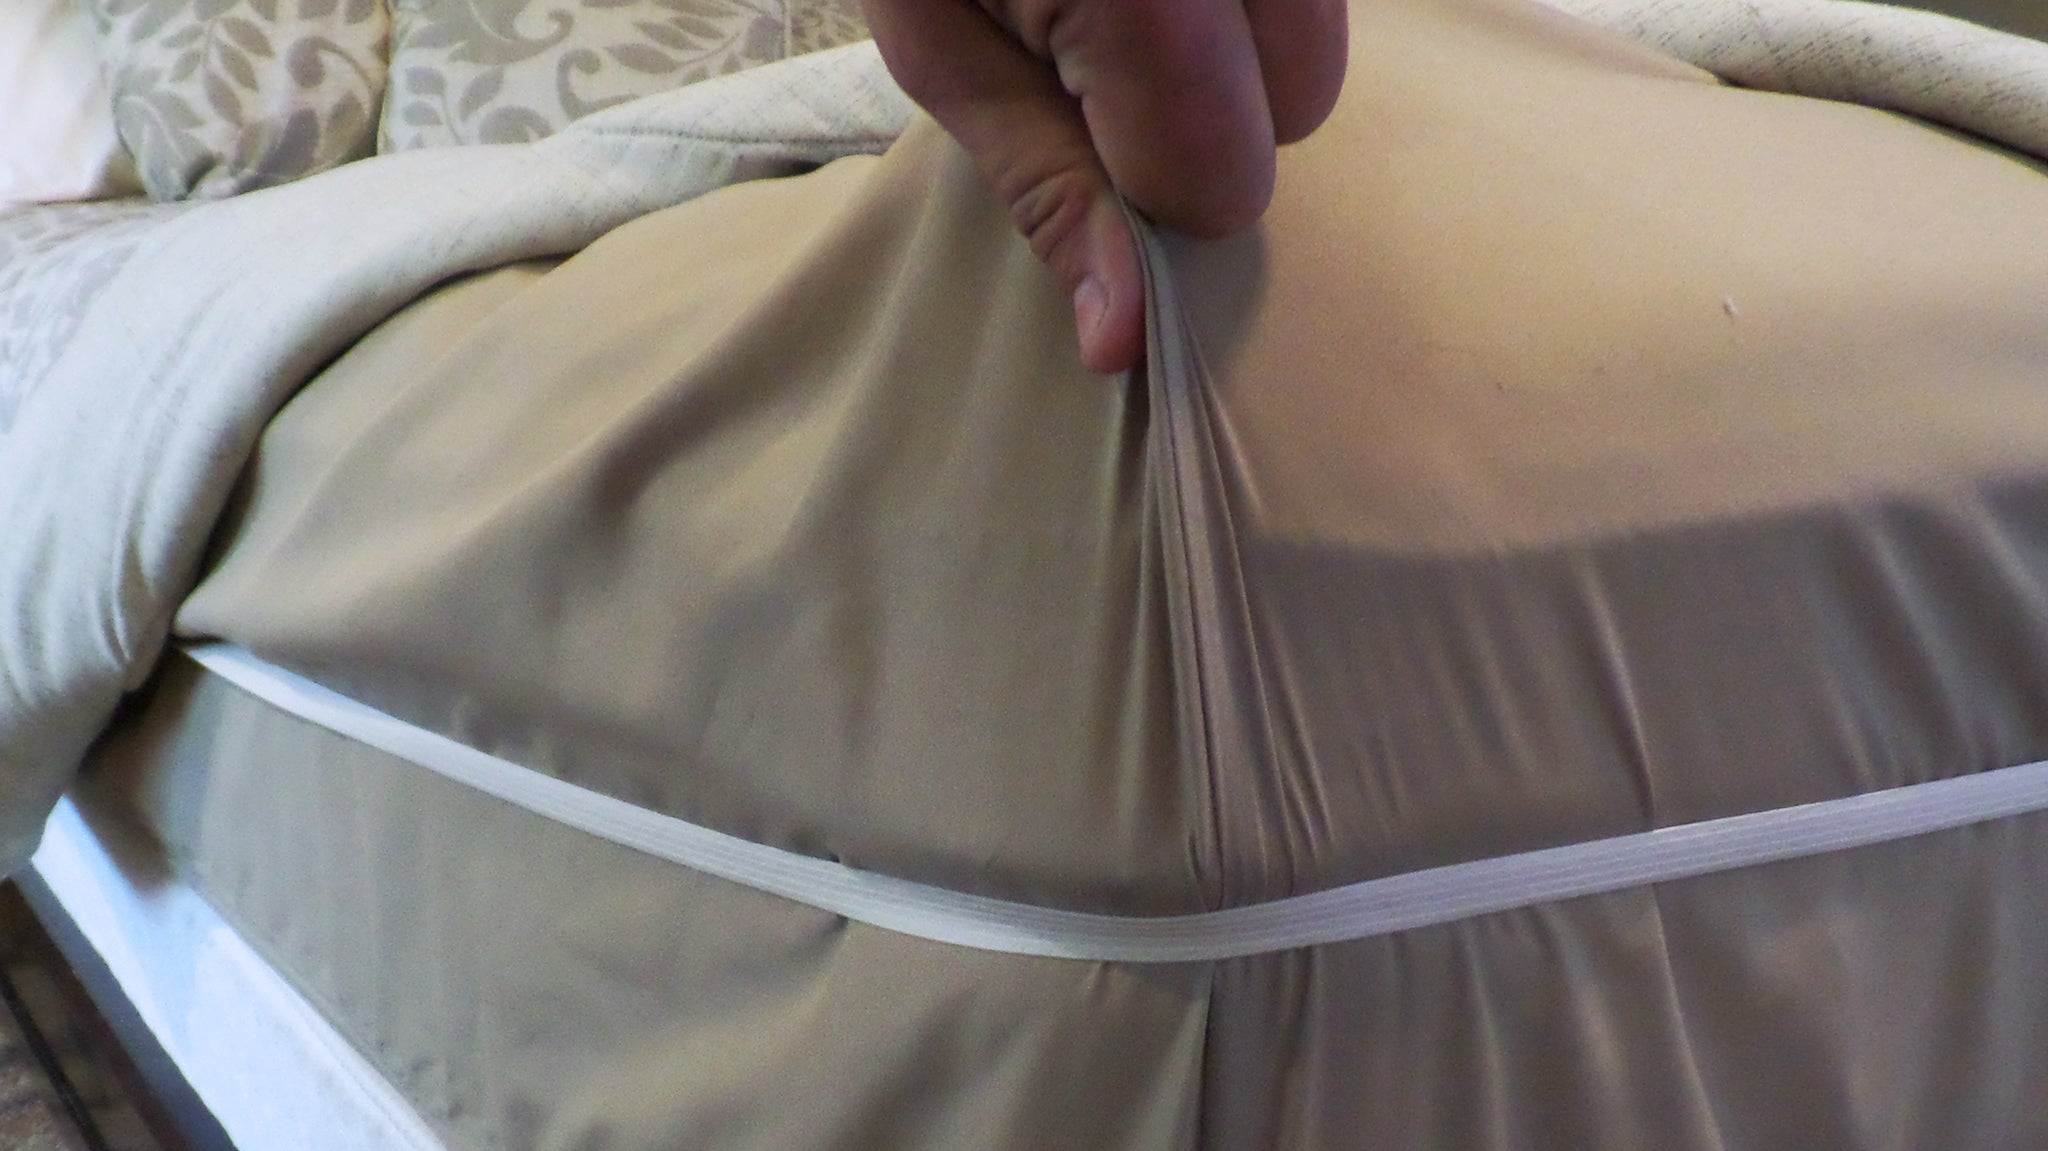 THE RUBBER HUGGER - The Bed Sheet Holder Band - NEW Approach For